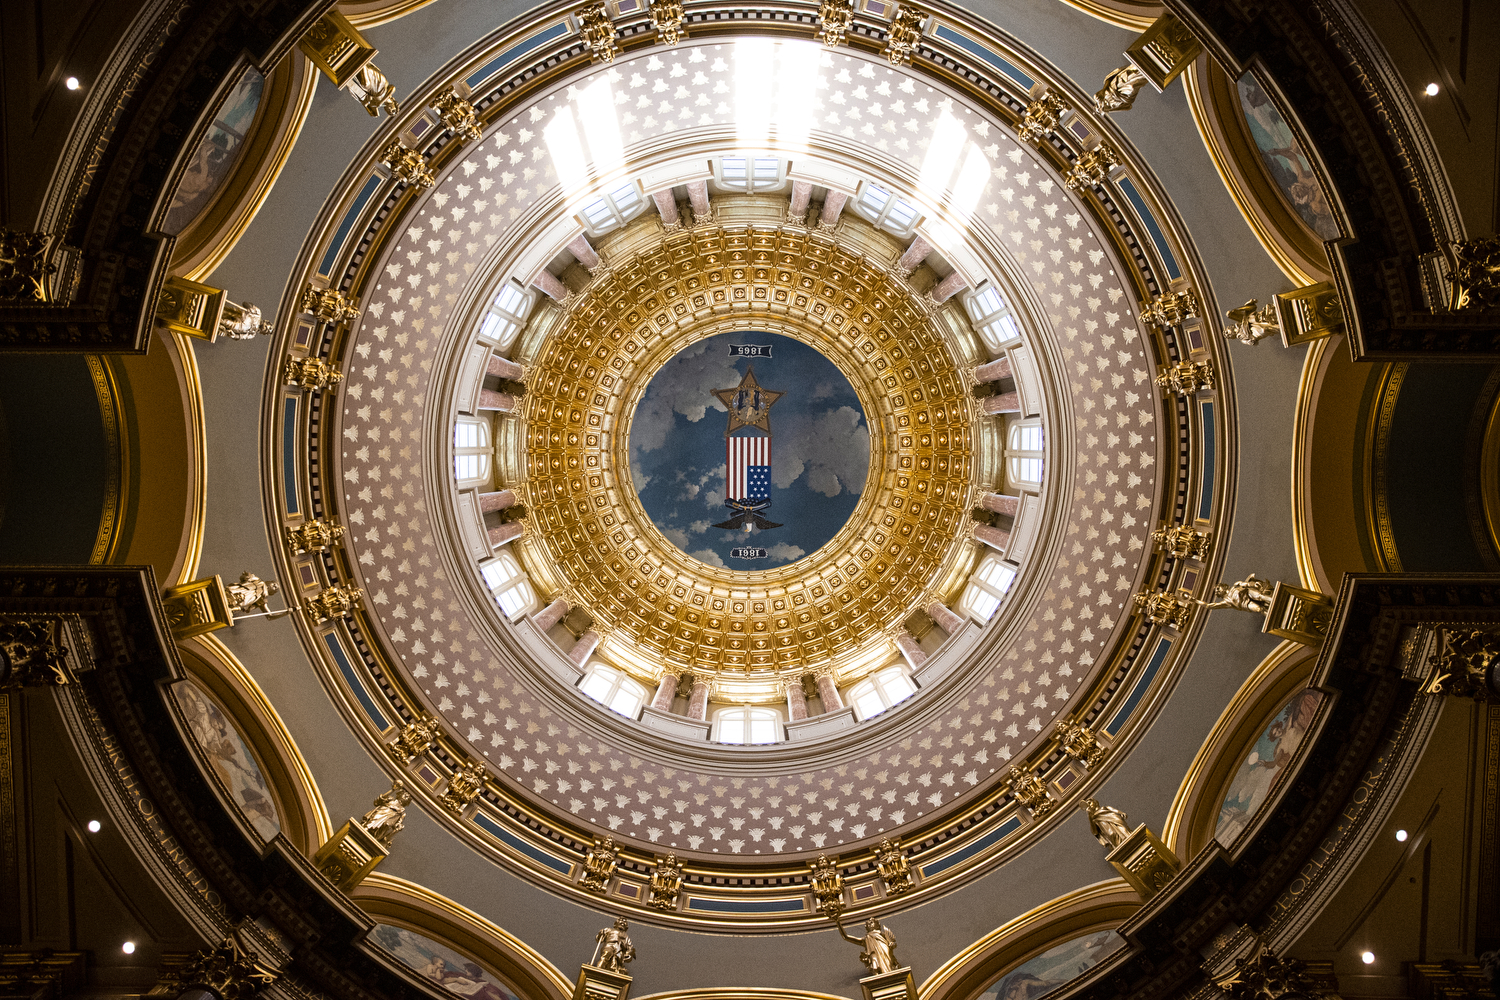 The Iowa State Capitol is seen during the first day of the 90th Iowa legislative session at the Iowa State Capitol in Des Moines on Monday, Jan. 9, 2023.